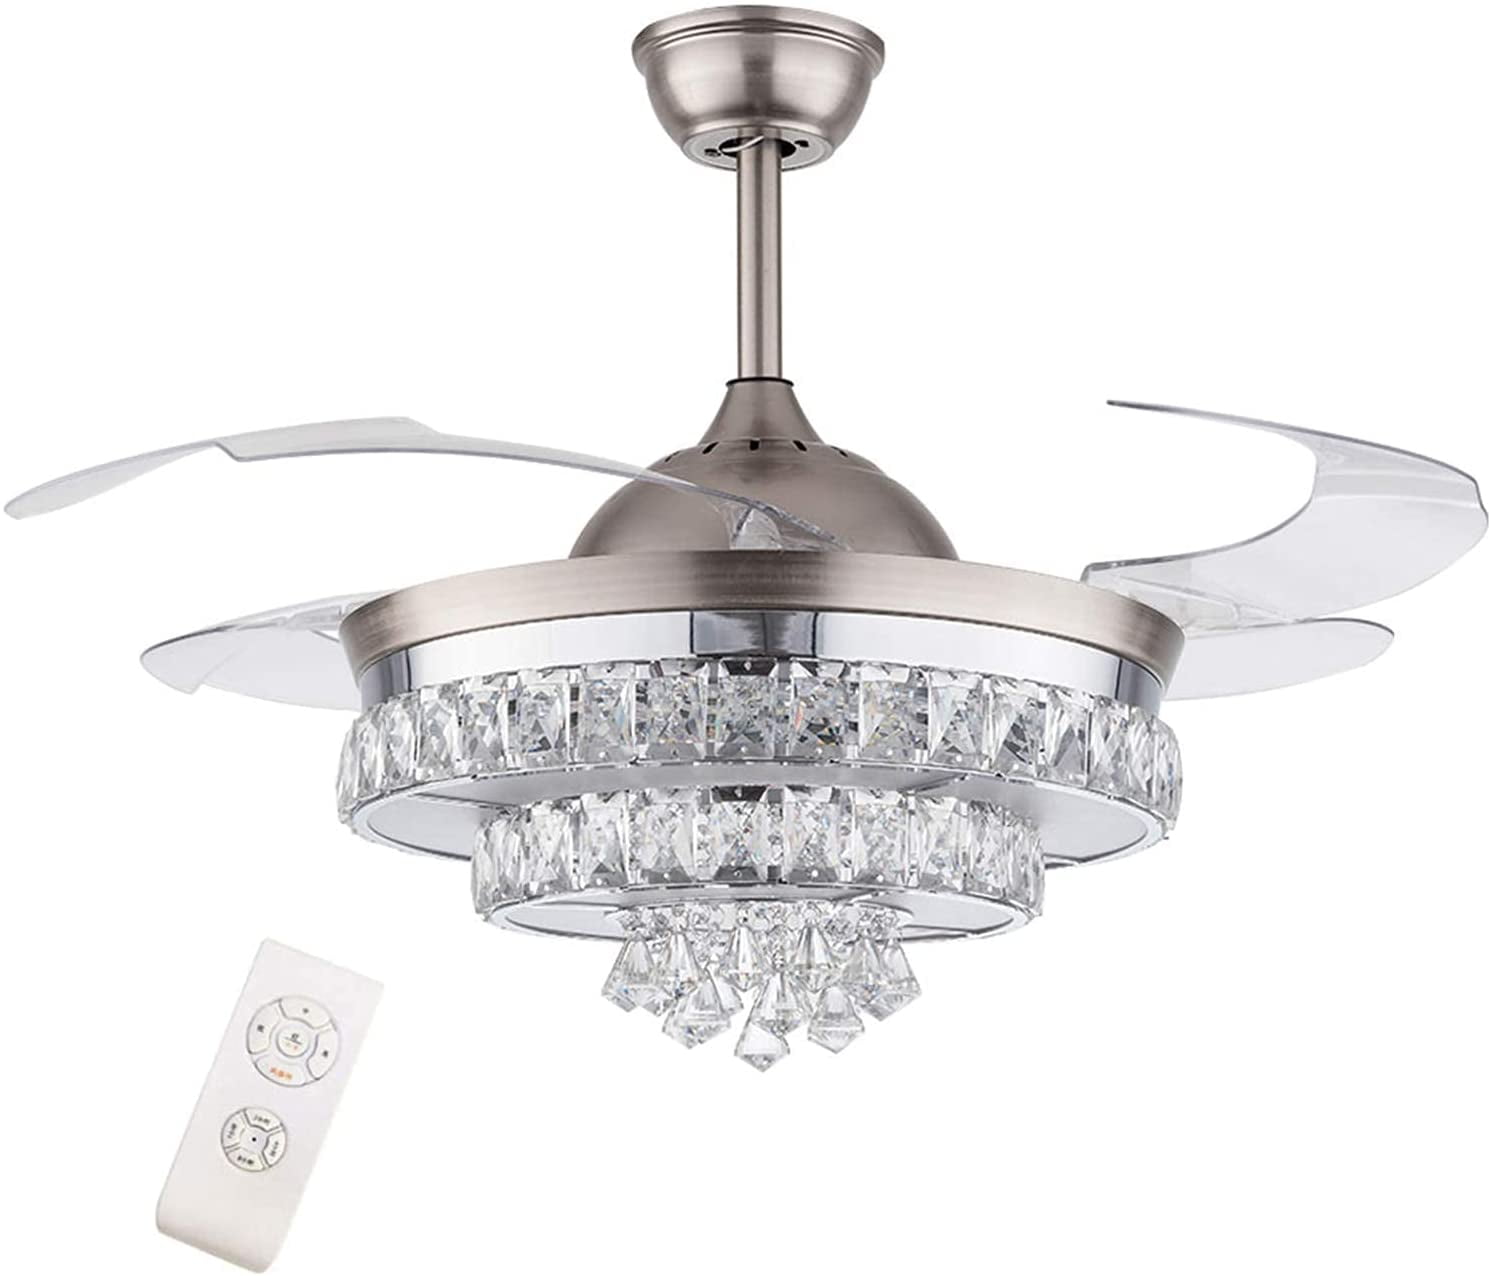 42" Crystal Invisible Ceiling Fan Light Retractable Chandelier Remote Control 